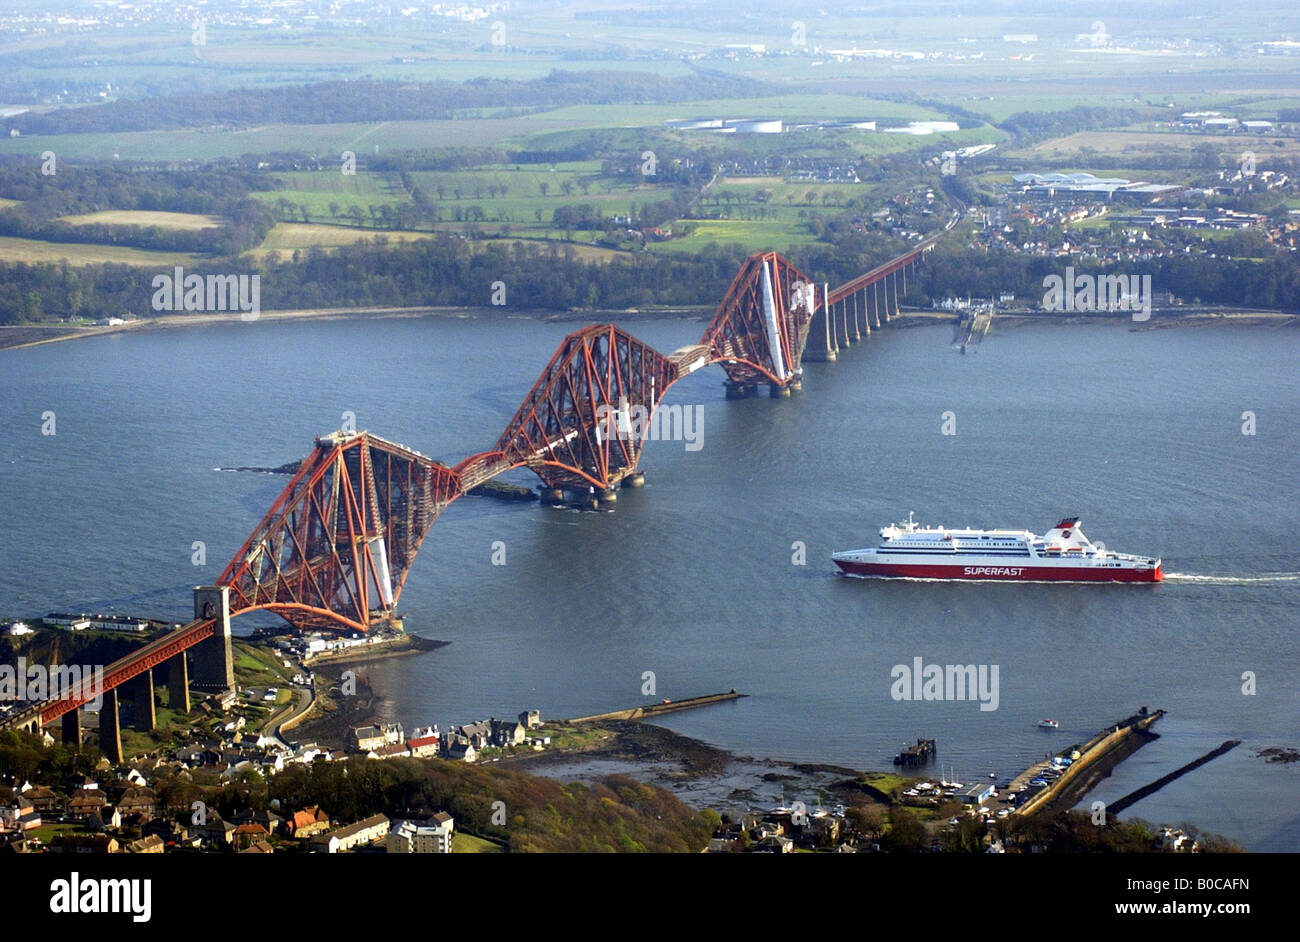 Superfast Ferry passing the Forth Bridges in Fife, Scotland Stock Photo